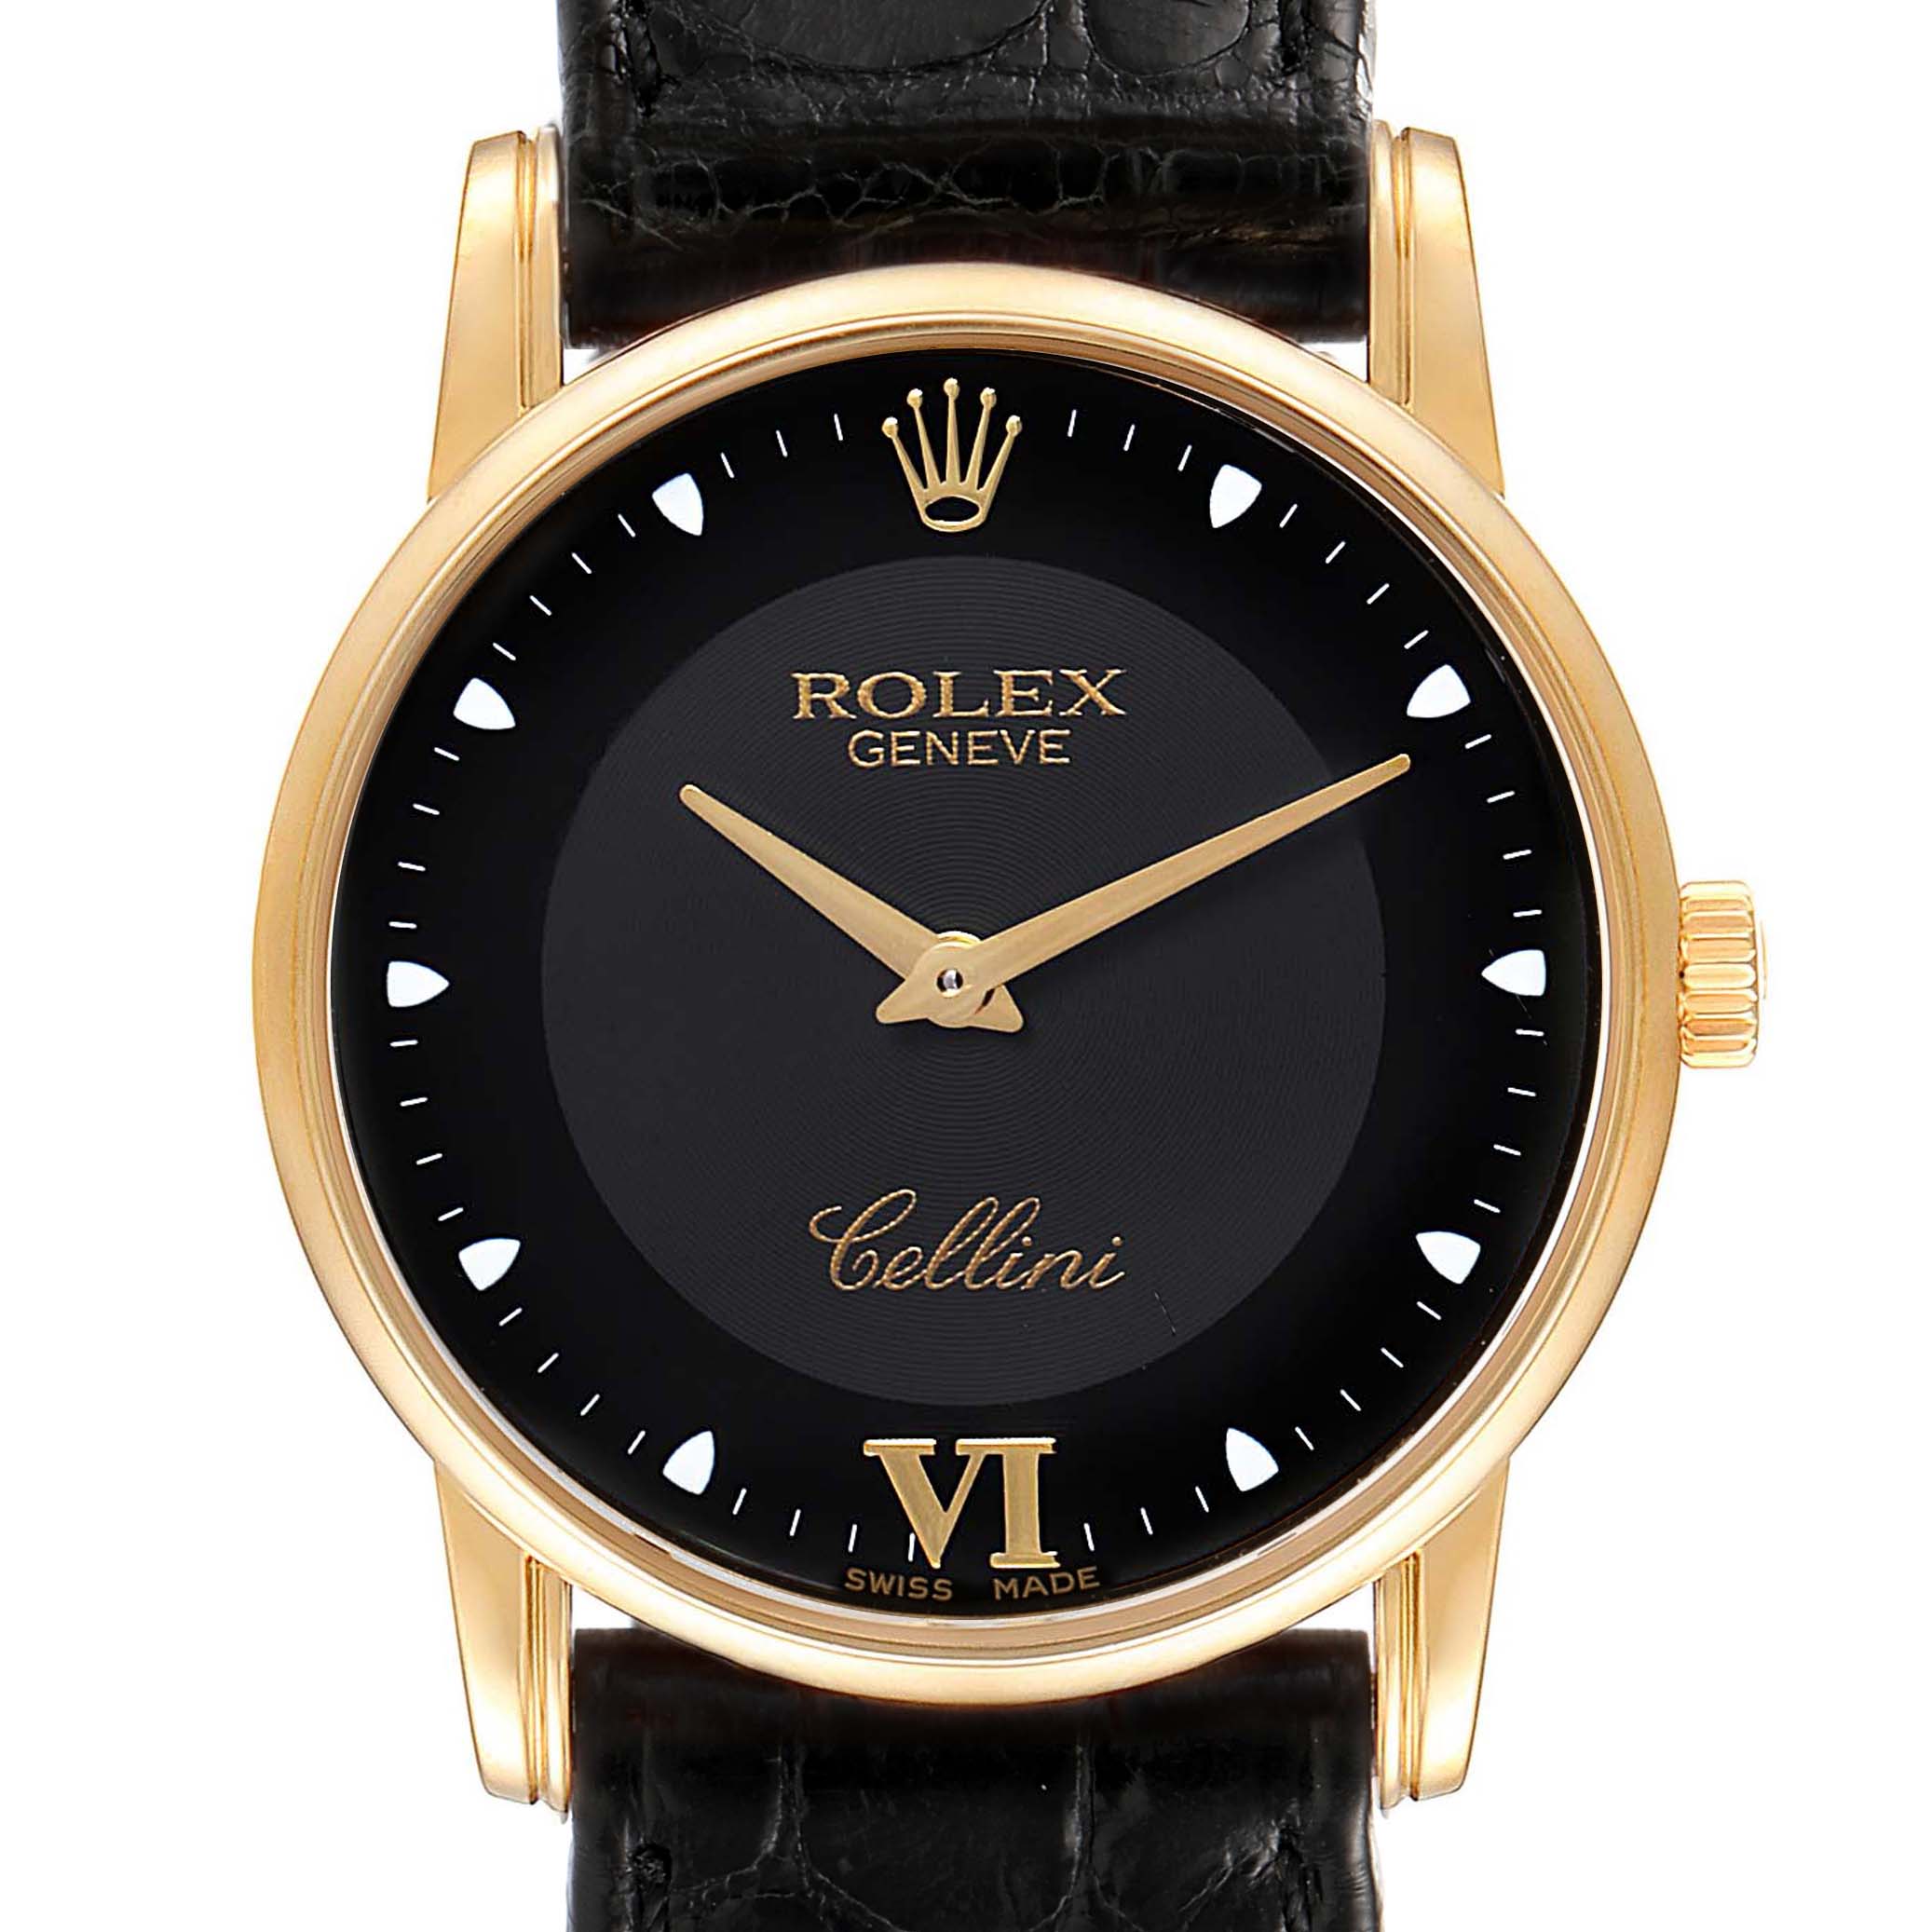 Rolex Cellini Classic Yellow Gold Black Dial Mens Watch 5116 Swisswatchexpo 7392